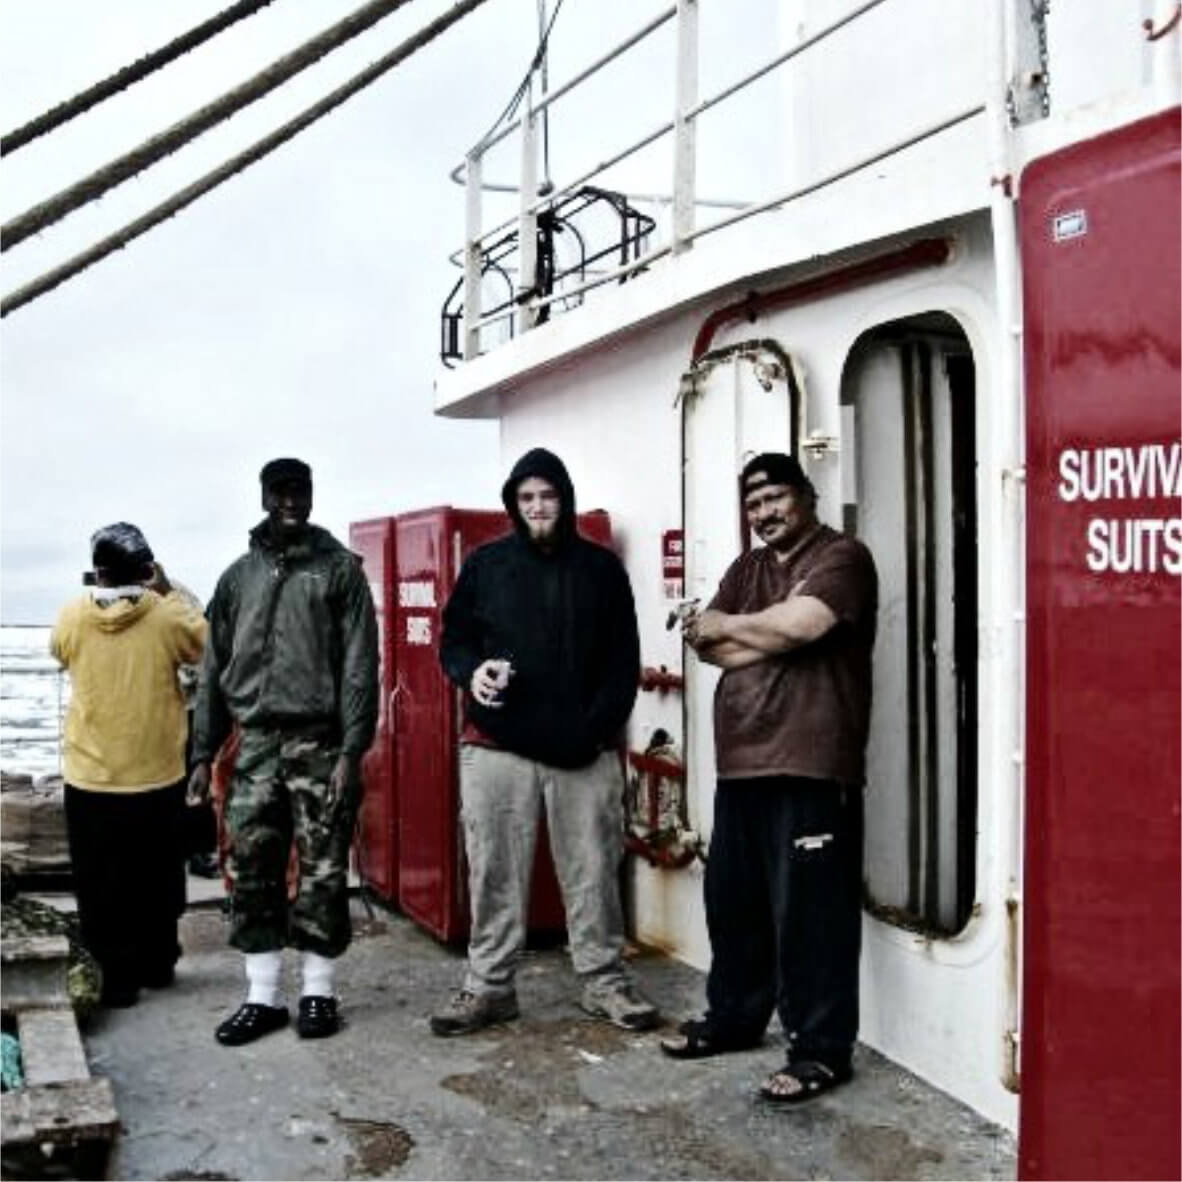 crew on a fishing boat